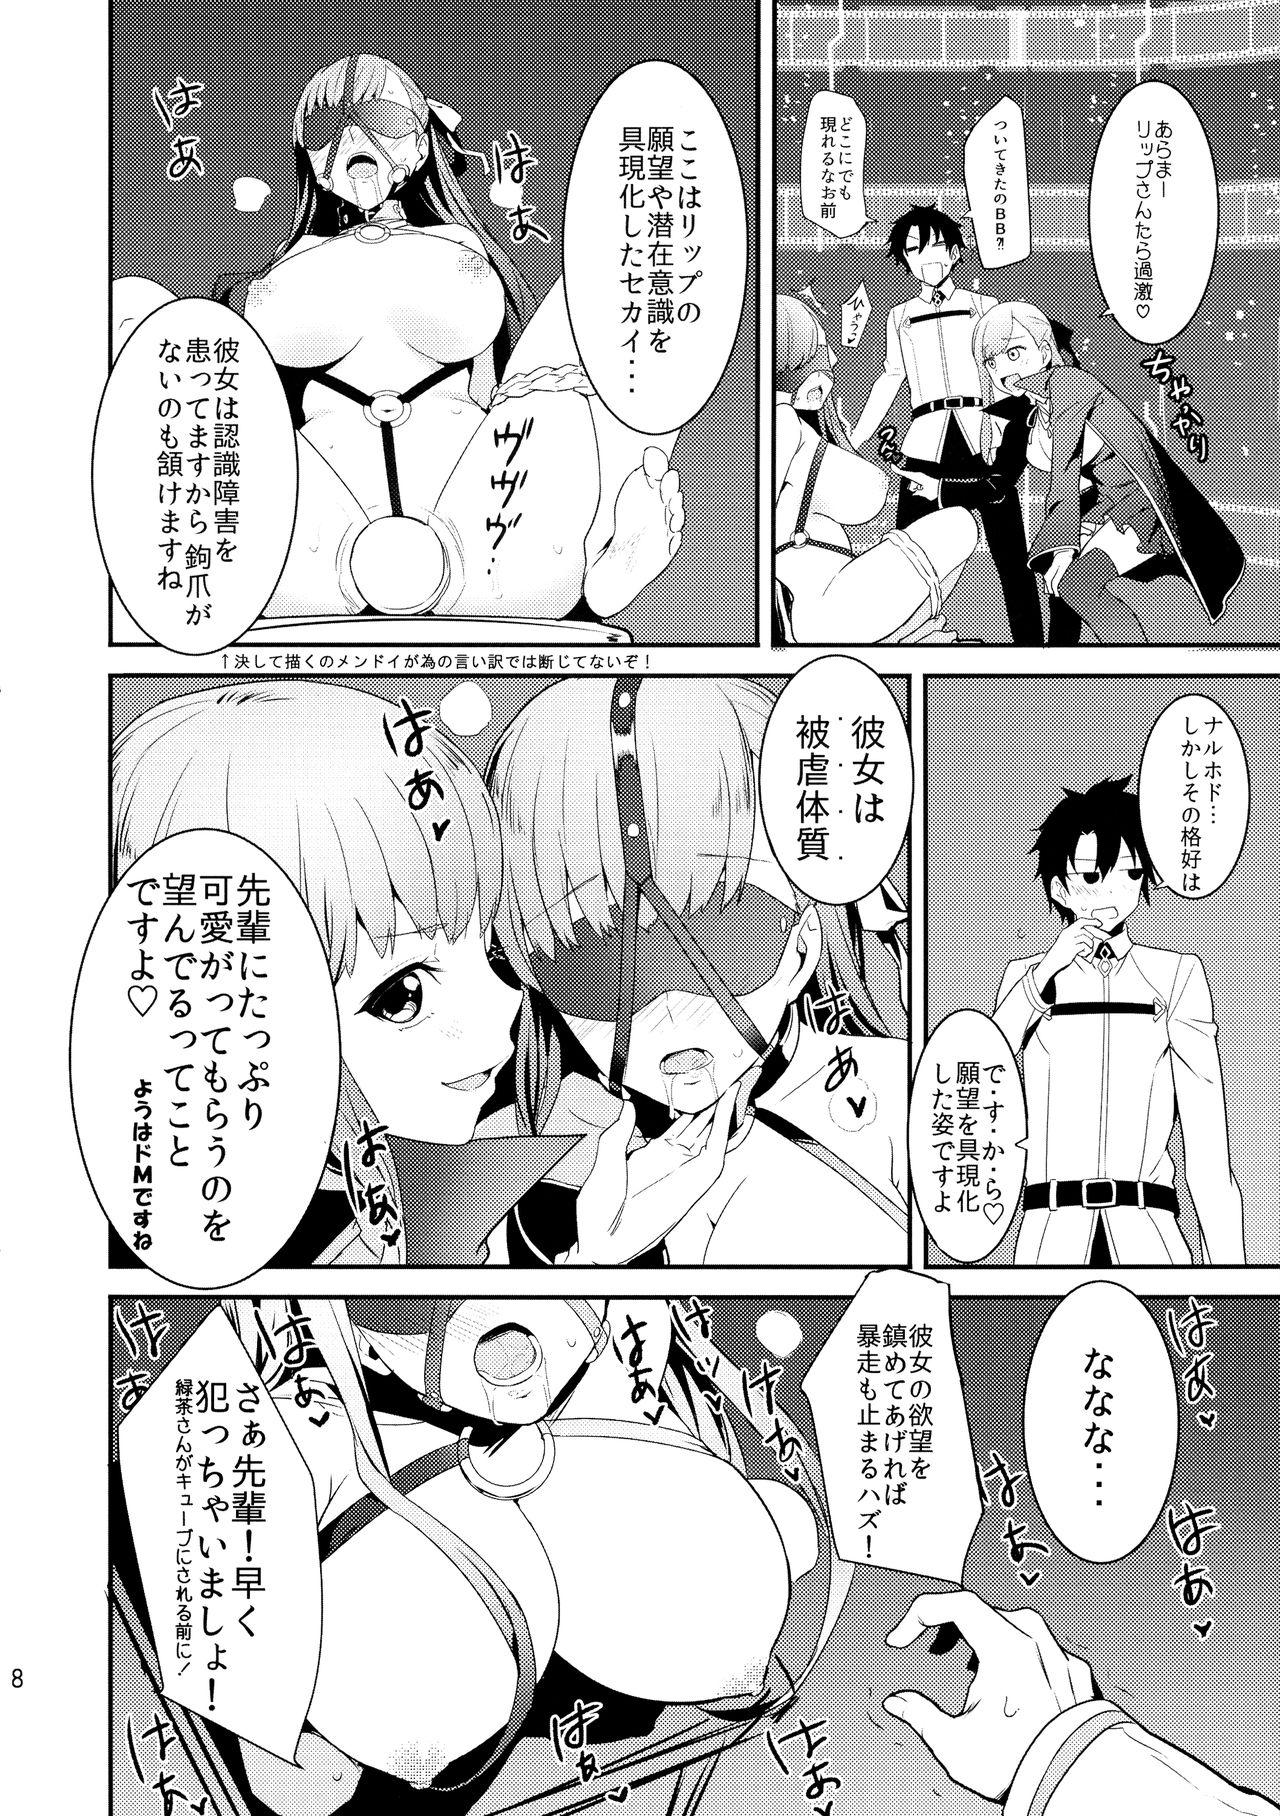 Thong In the Passion, Melty heart. 1 - Fate grand order Private - Page 10